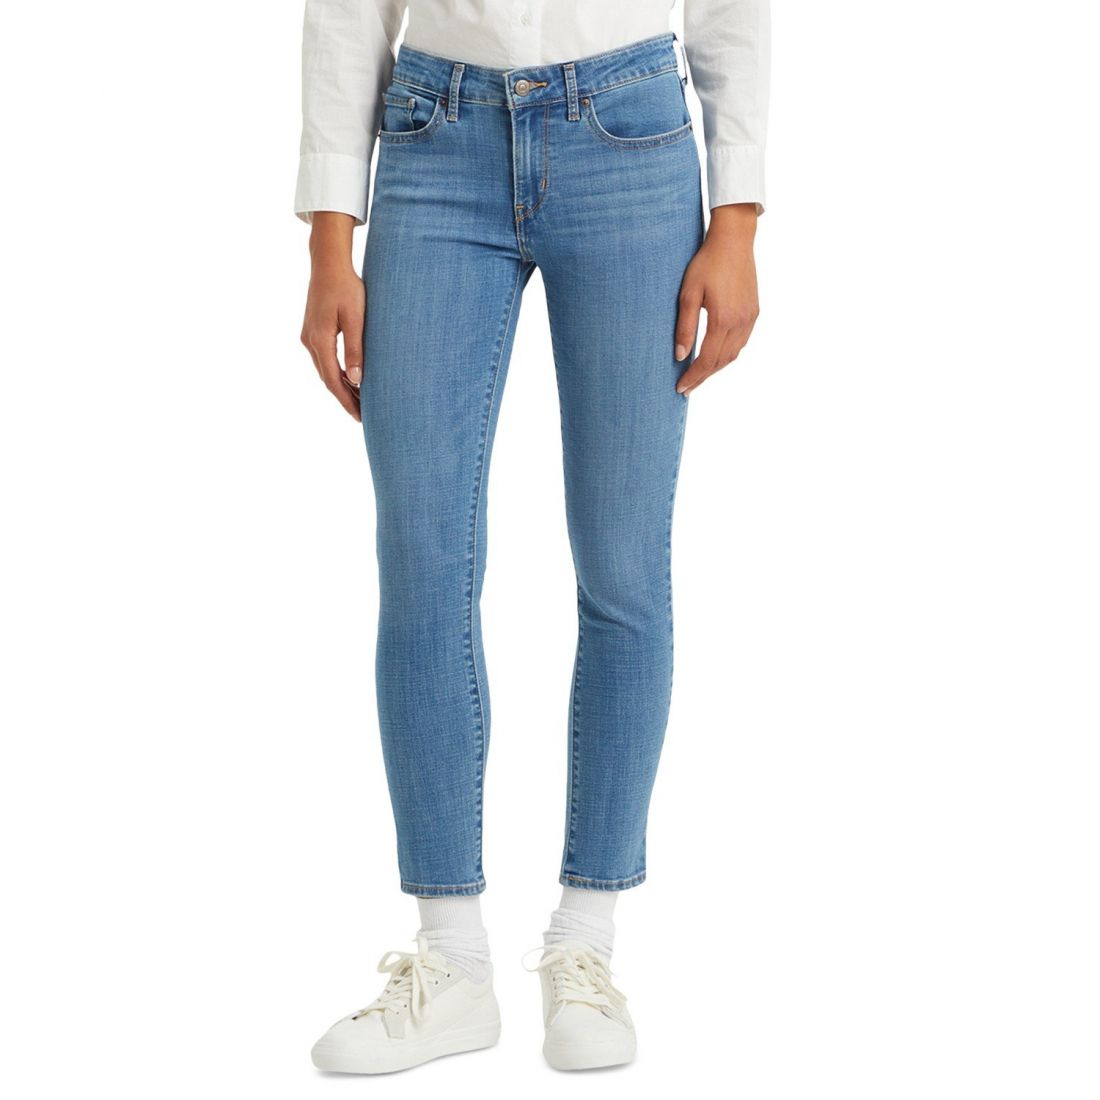 Levi's - Jeans skinny '711 Ripped' pour Femmes